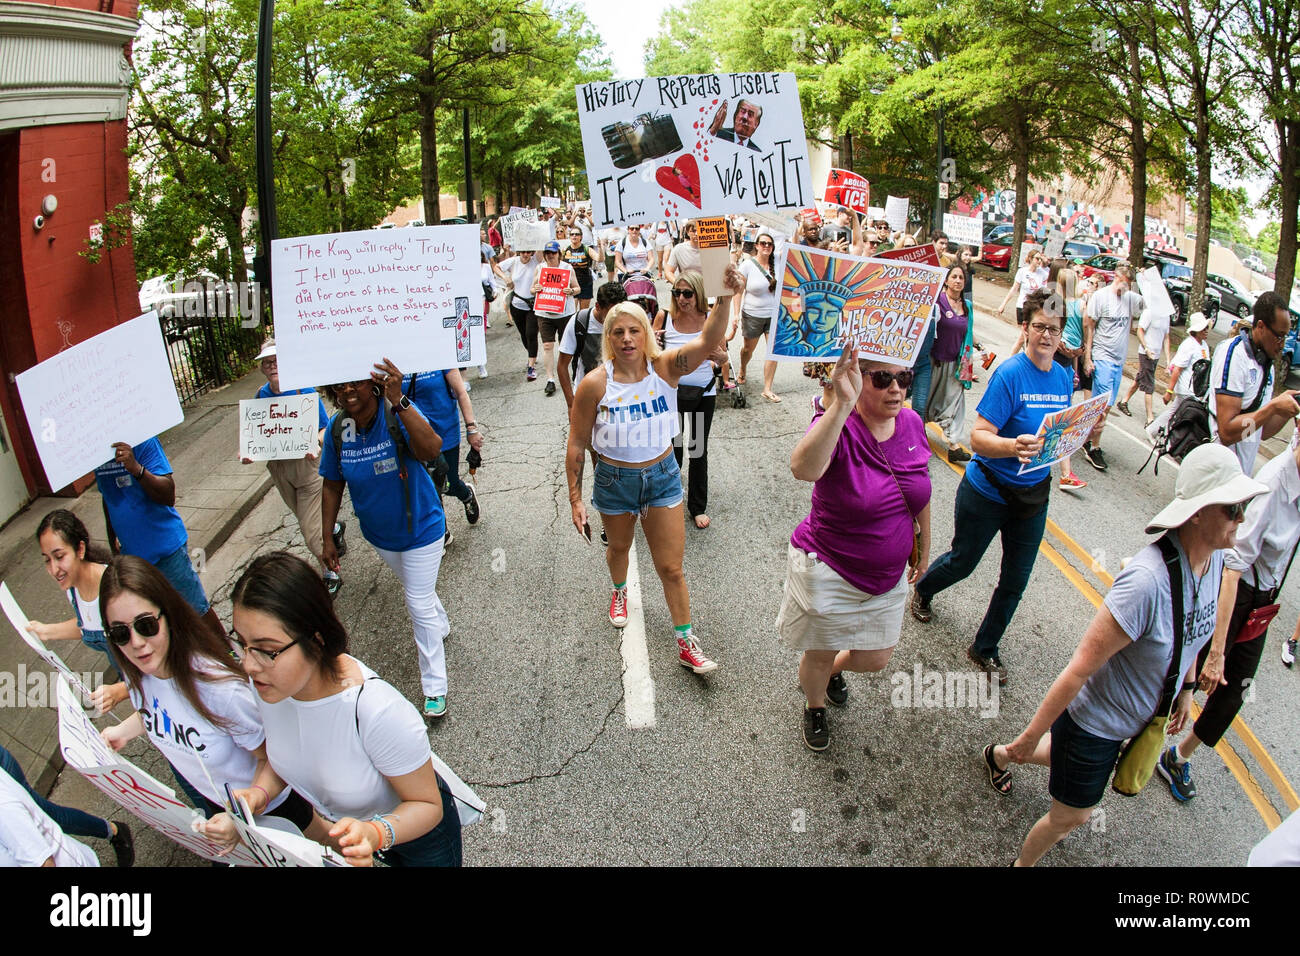 People hold anti-ICE and anti-Trump signs and banners as they walk in an immigration law protest and march on June 30, 2018 in Atlanta, GA. Stock Photo